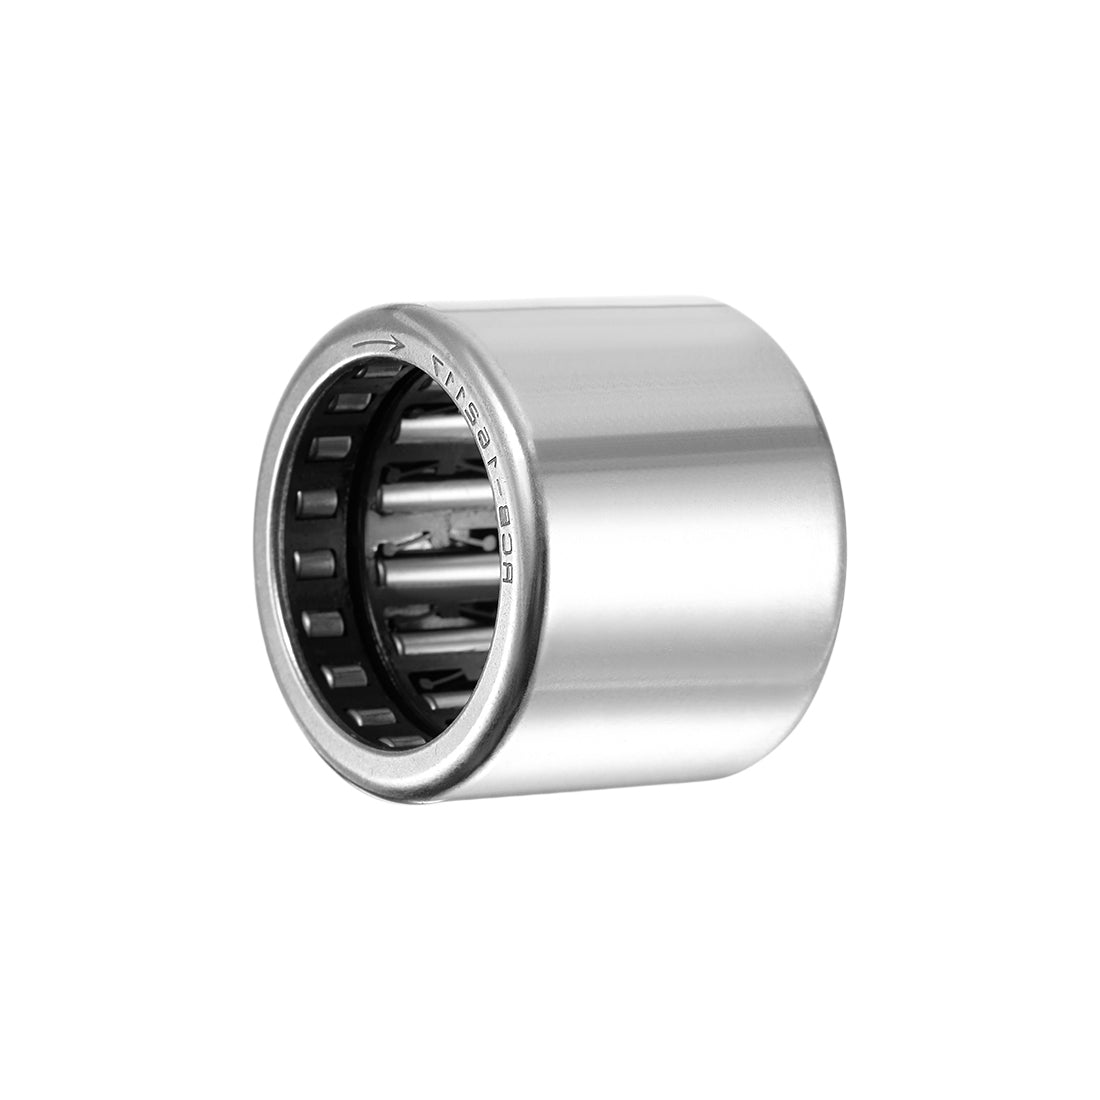 uxcell Uxcell RCB121616 Needle Roller Bearings, One Way Bearing, 3/4" Bore 1" OD 1" Width